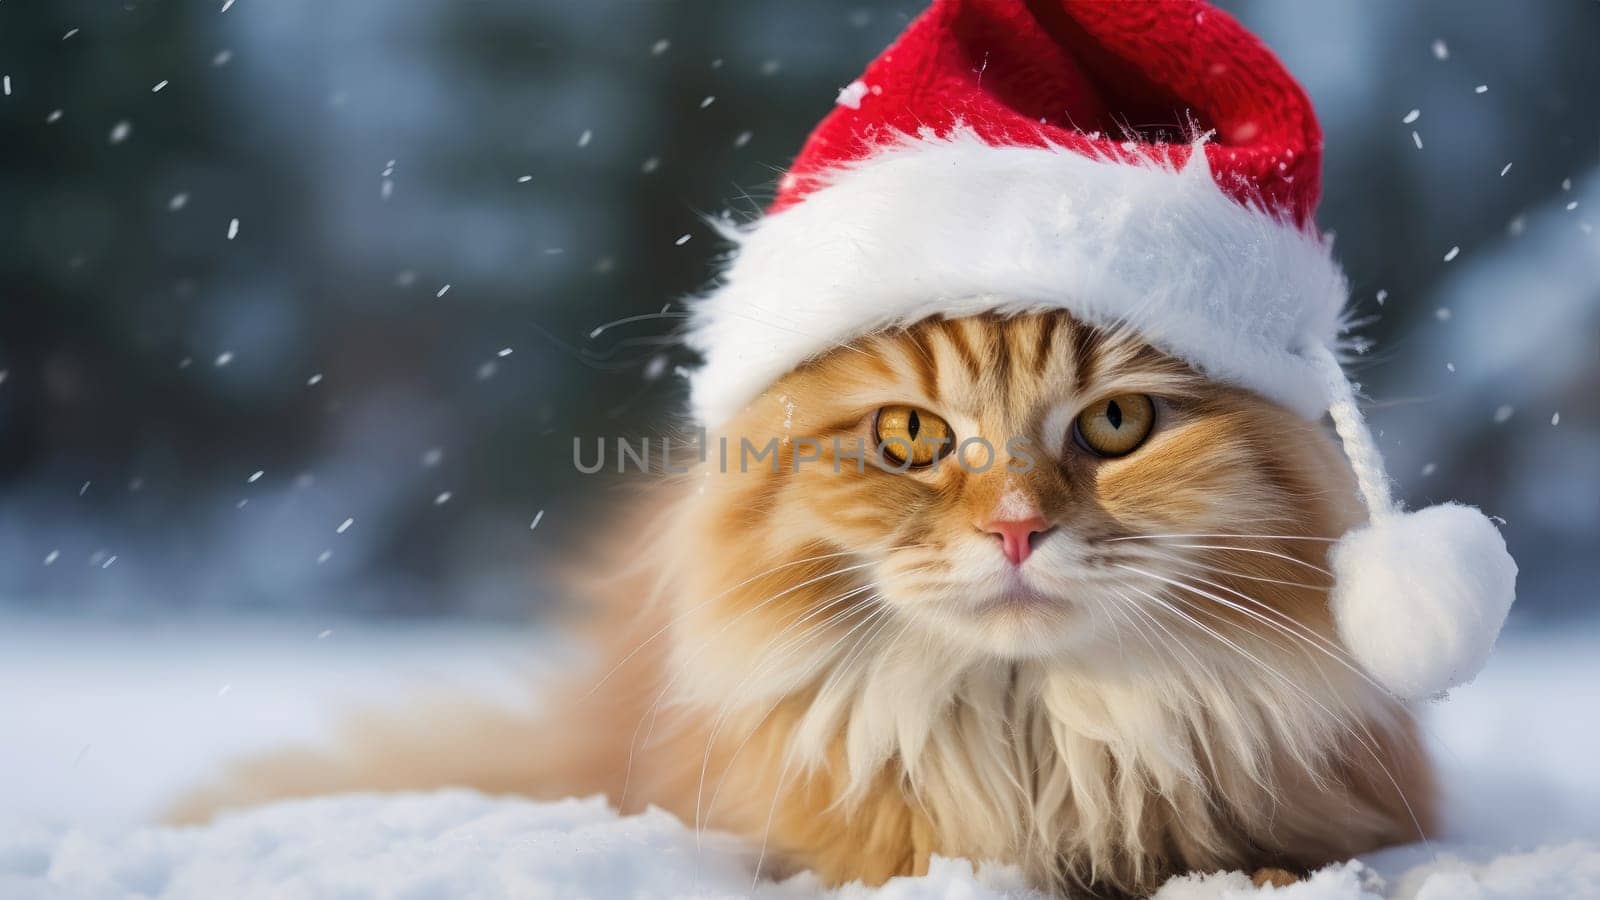 A festive cat in a red Santa Claus hat brings a festive mood for the New Year and Christmas holidays. The cat poses playfully, representing the joy of the season.